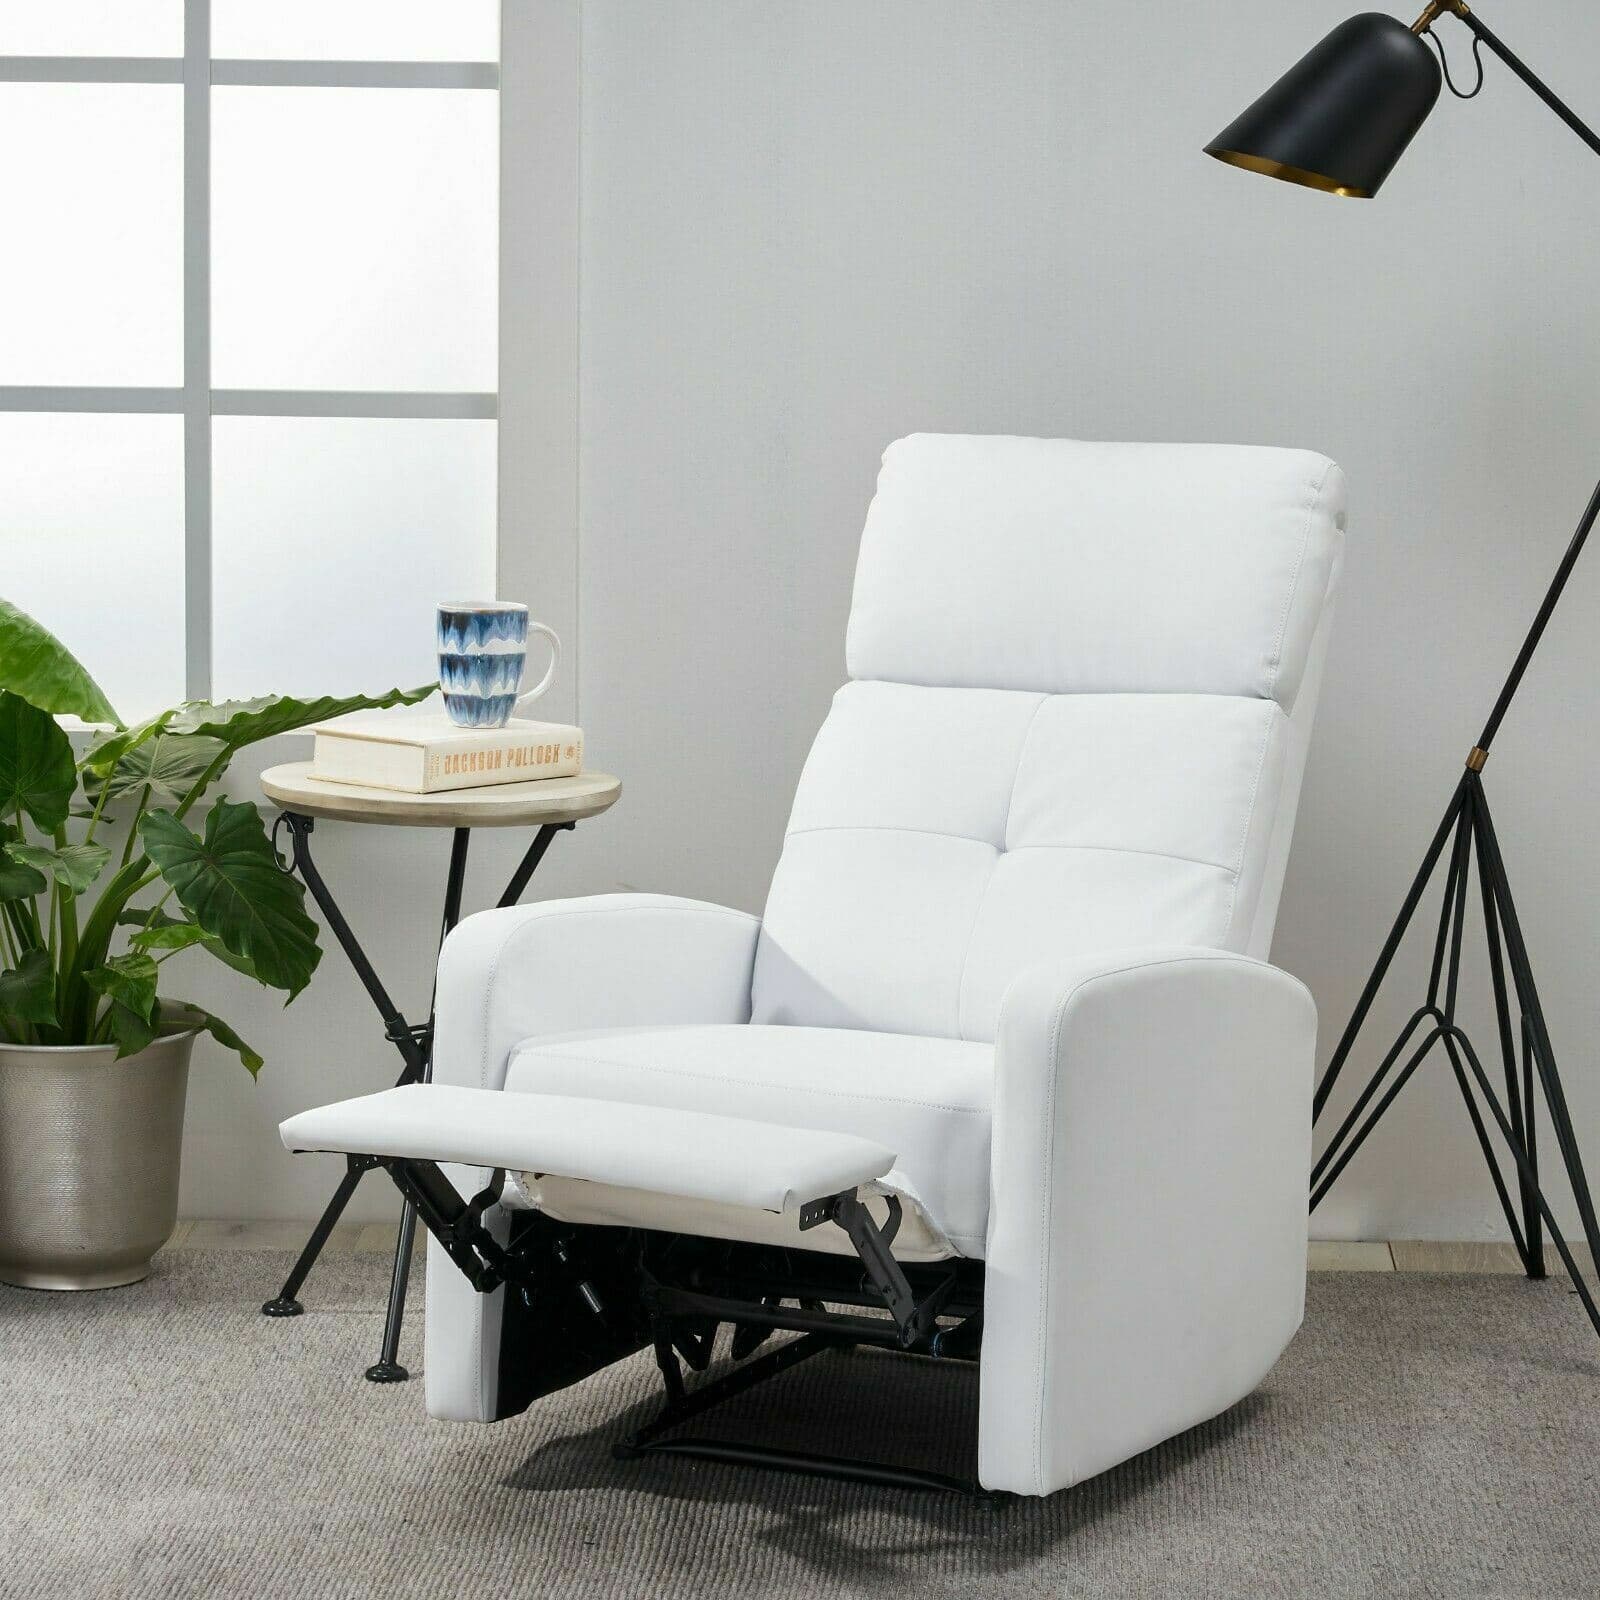 A white recliner chair in a living room.